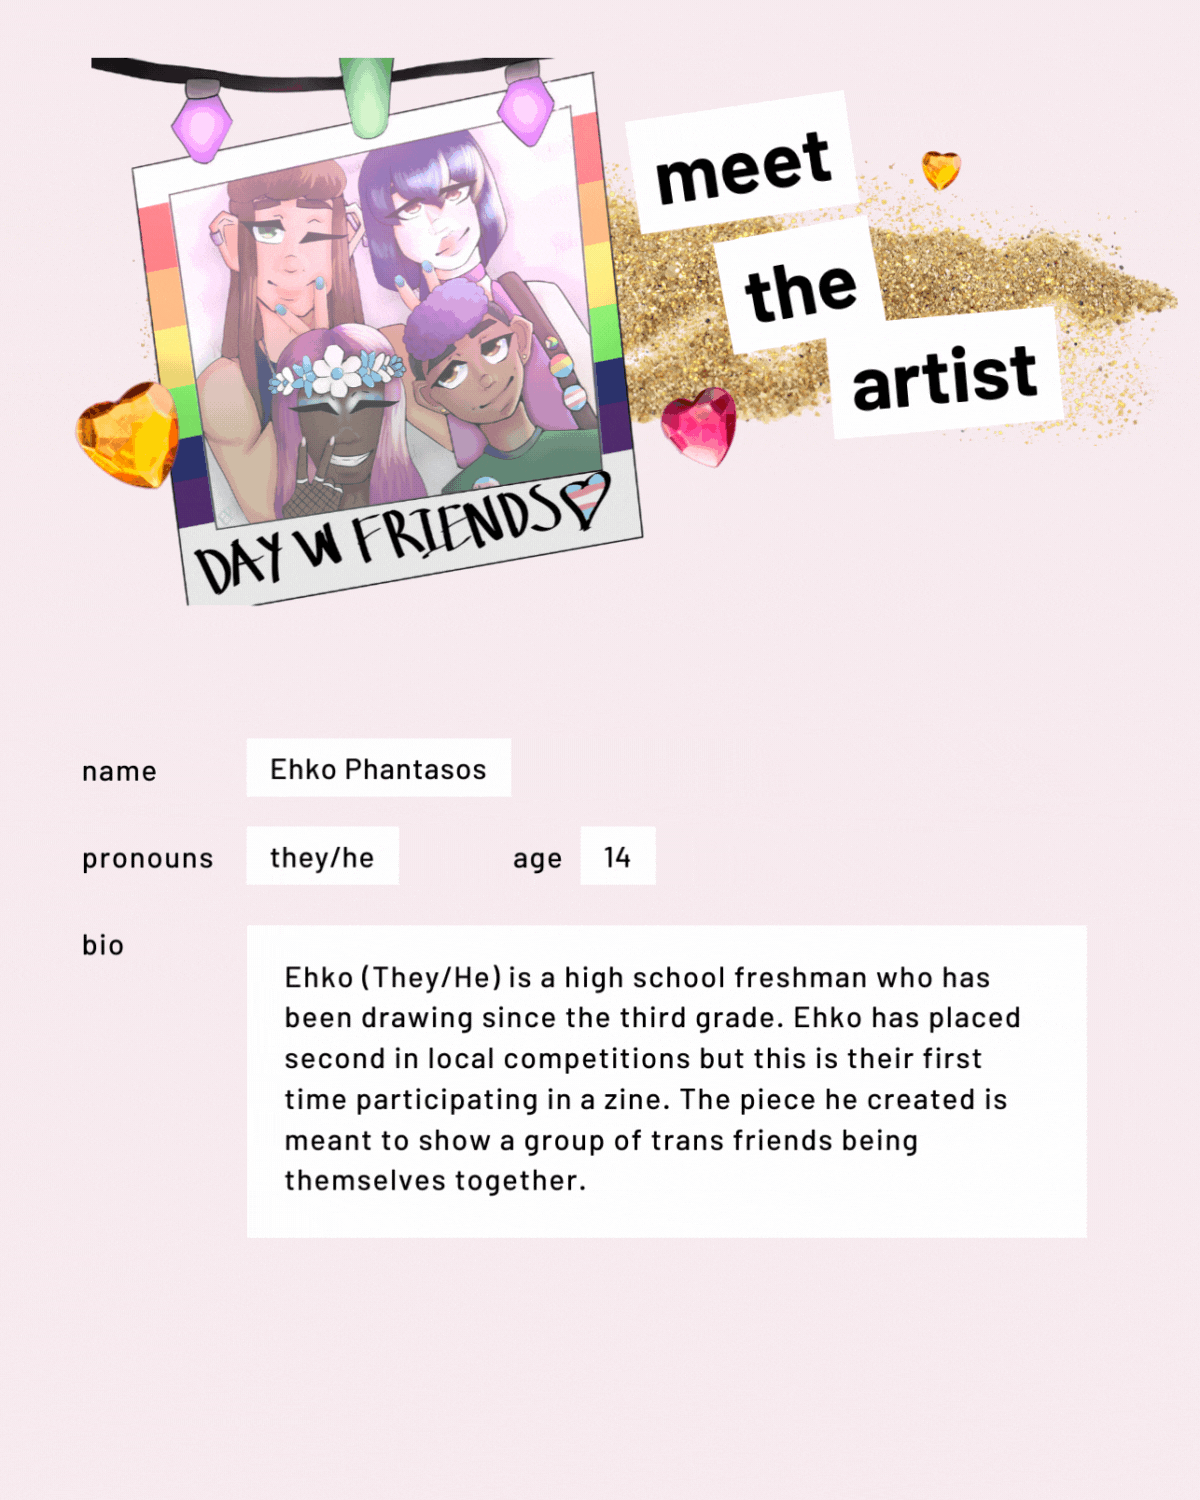 Meet the artist page with an illustrated polaroid photo. Text reads "Meet the artist. Name: Ehko Phantasos. Pronouns: they/he. Bio: Ehko (They/He) is a high school freshman who has been drawing since the third grade. Ehko has placed second in local competitions but this is their first time participating in a zine. The piece he created is meant to show a group of trans friends being themselves together.